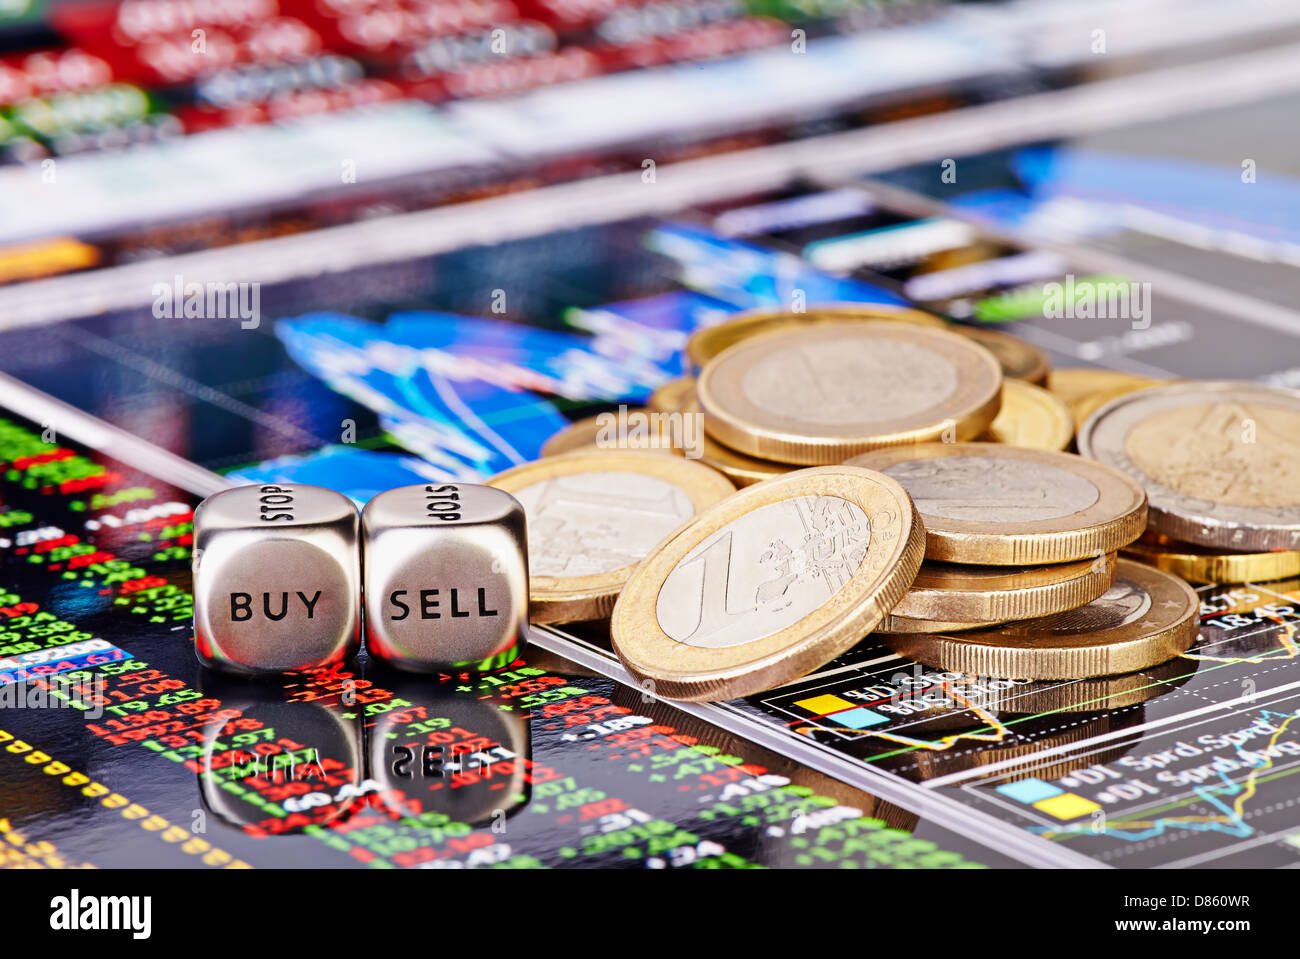 Dices cubes with the words SELL BUY, one-euro coins and a financial chart as the background. Selective focus Stock Photo